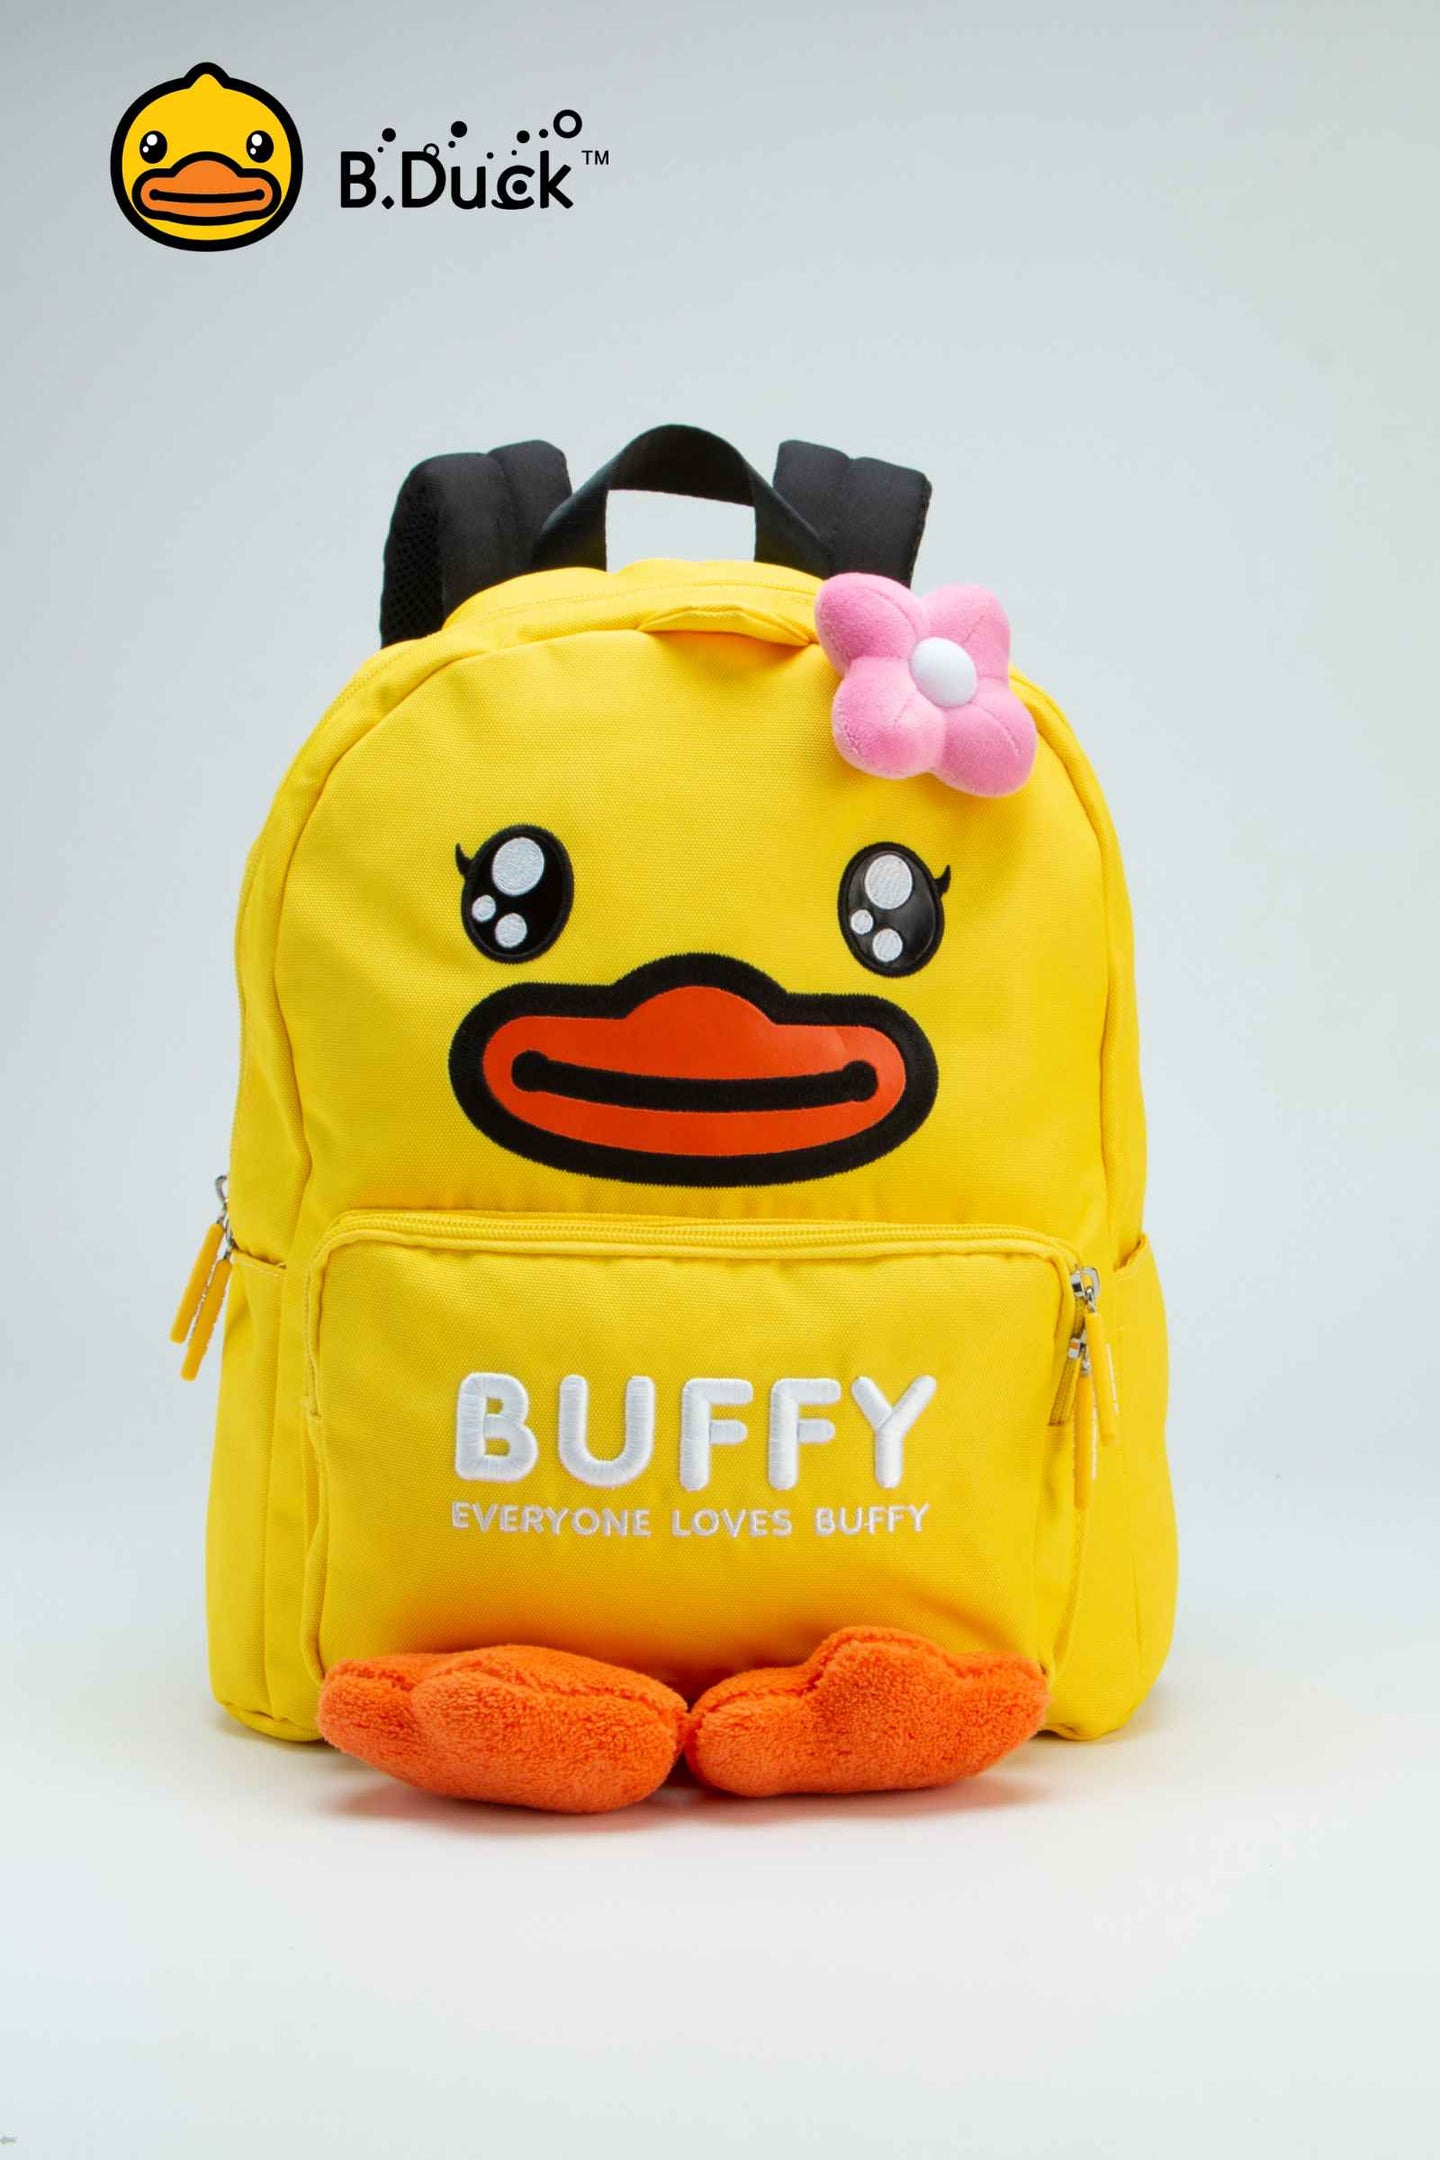 B.Duck Backpack Yellow Large For Kids Cute Plush Flower